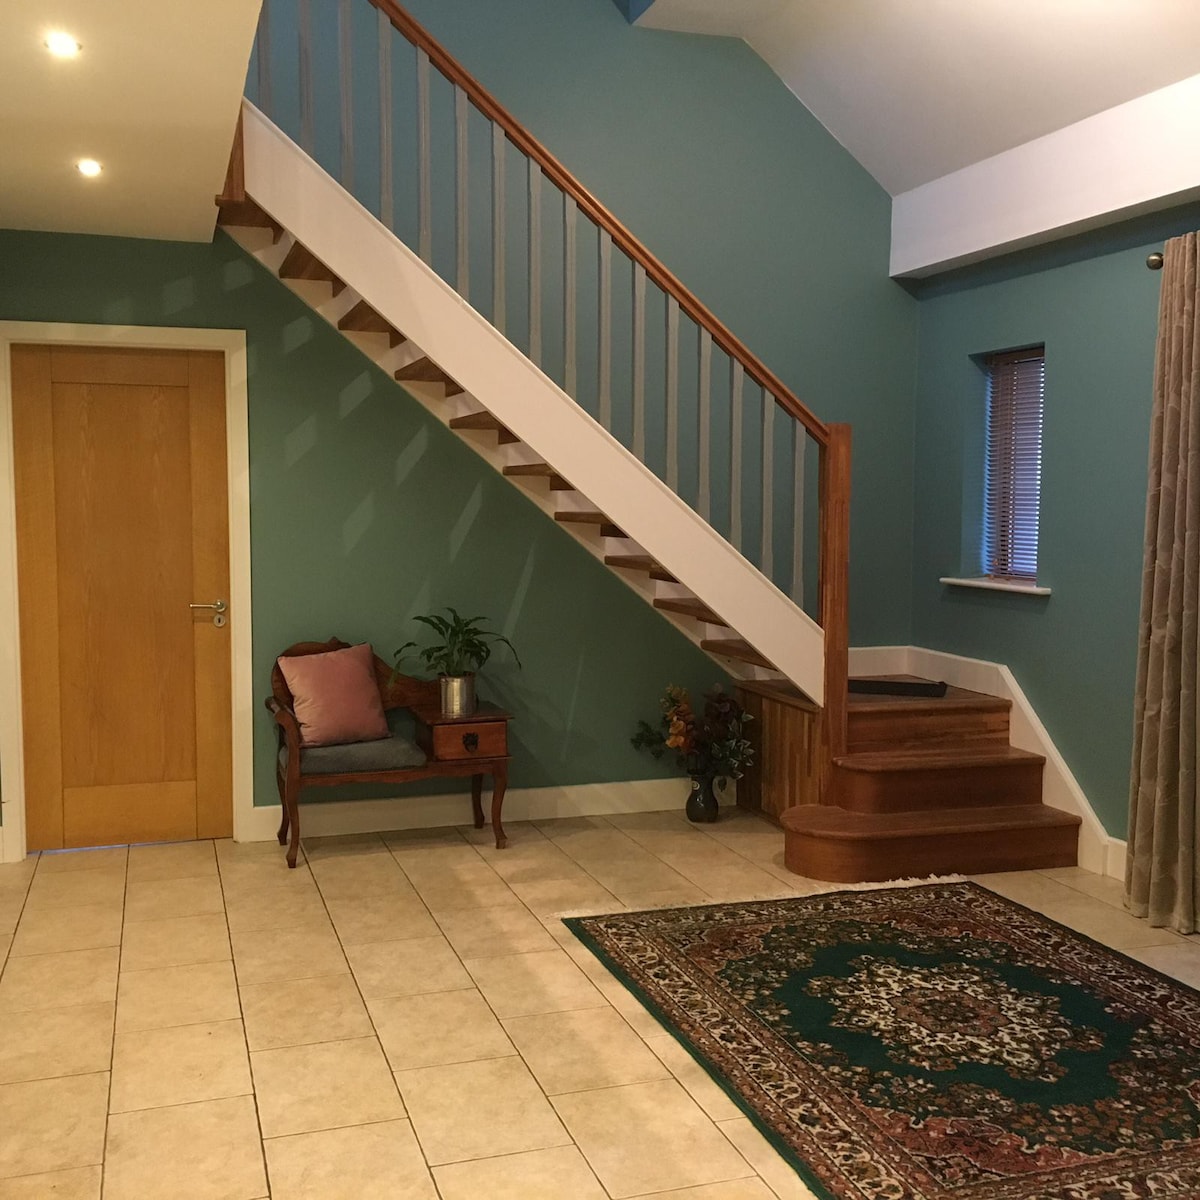 Spacious and cozy home with Youghal Bay views